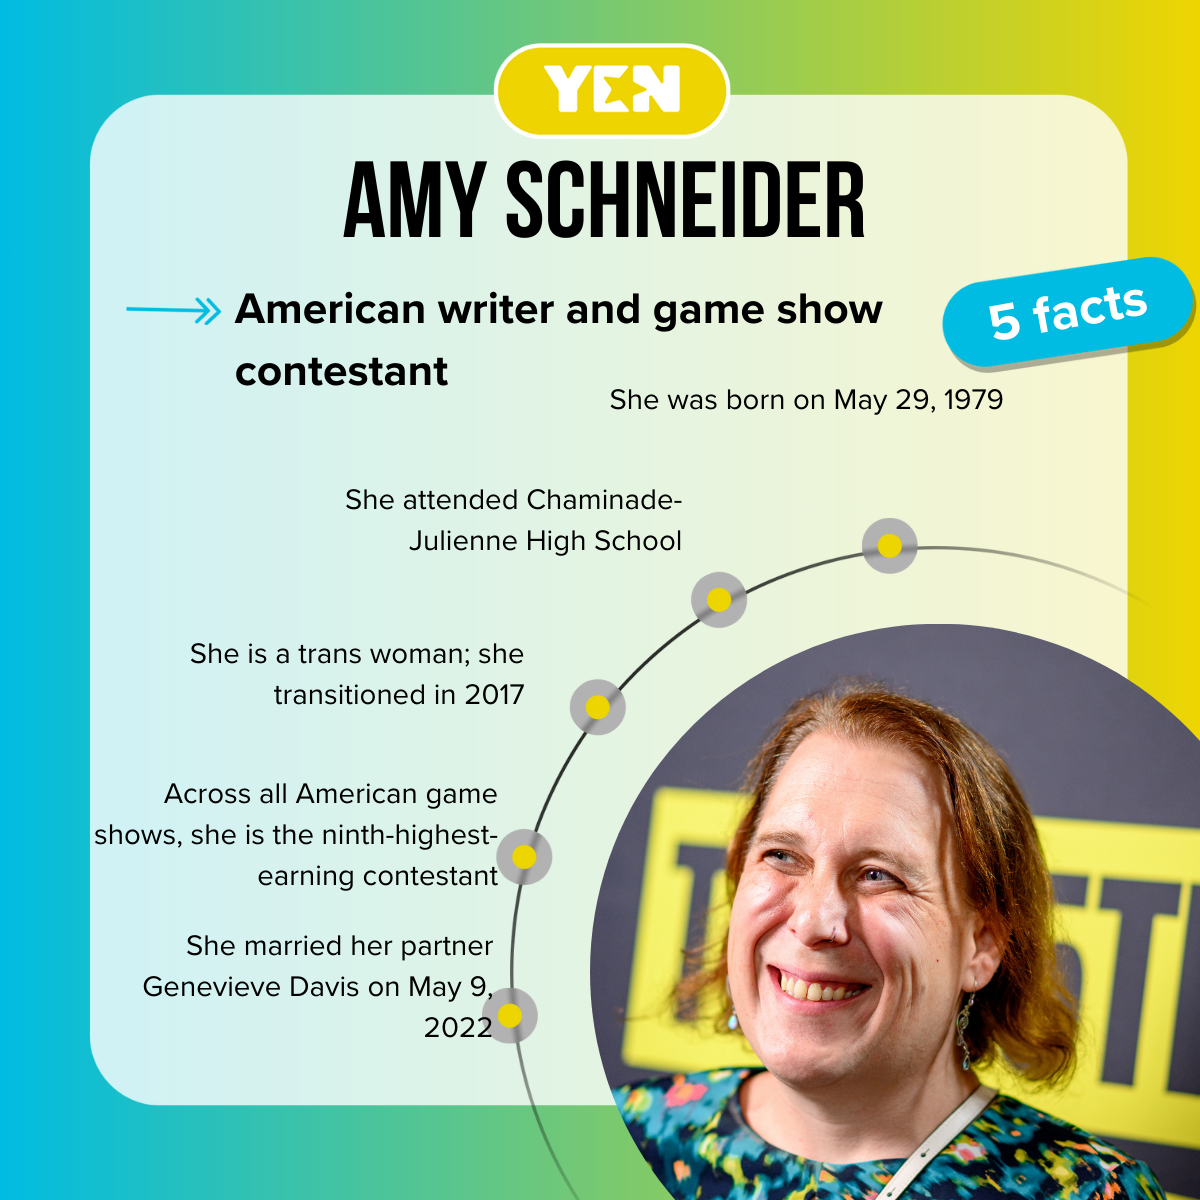 Top 5 facts about Amy Schneider